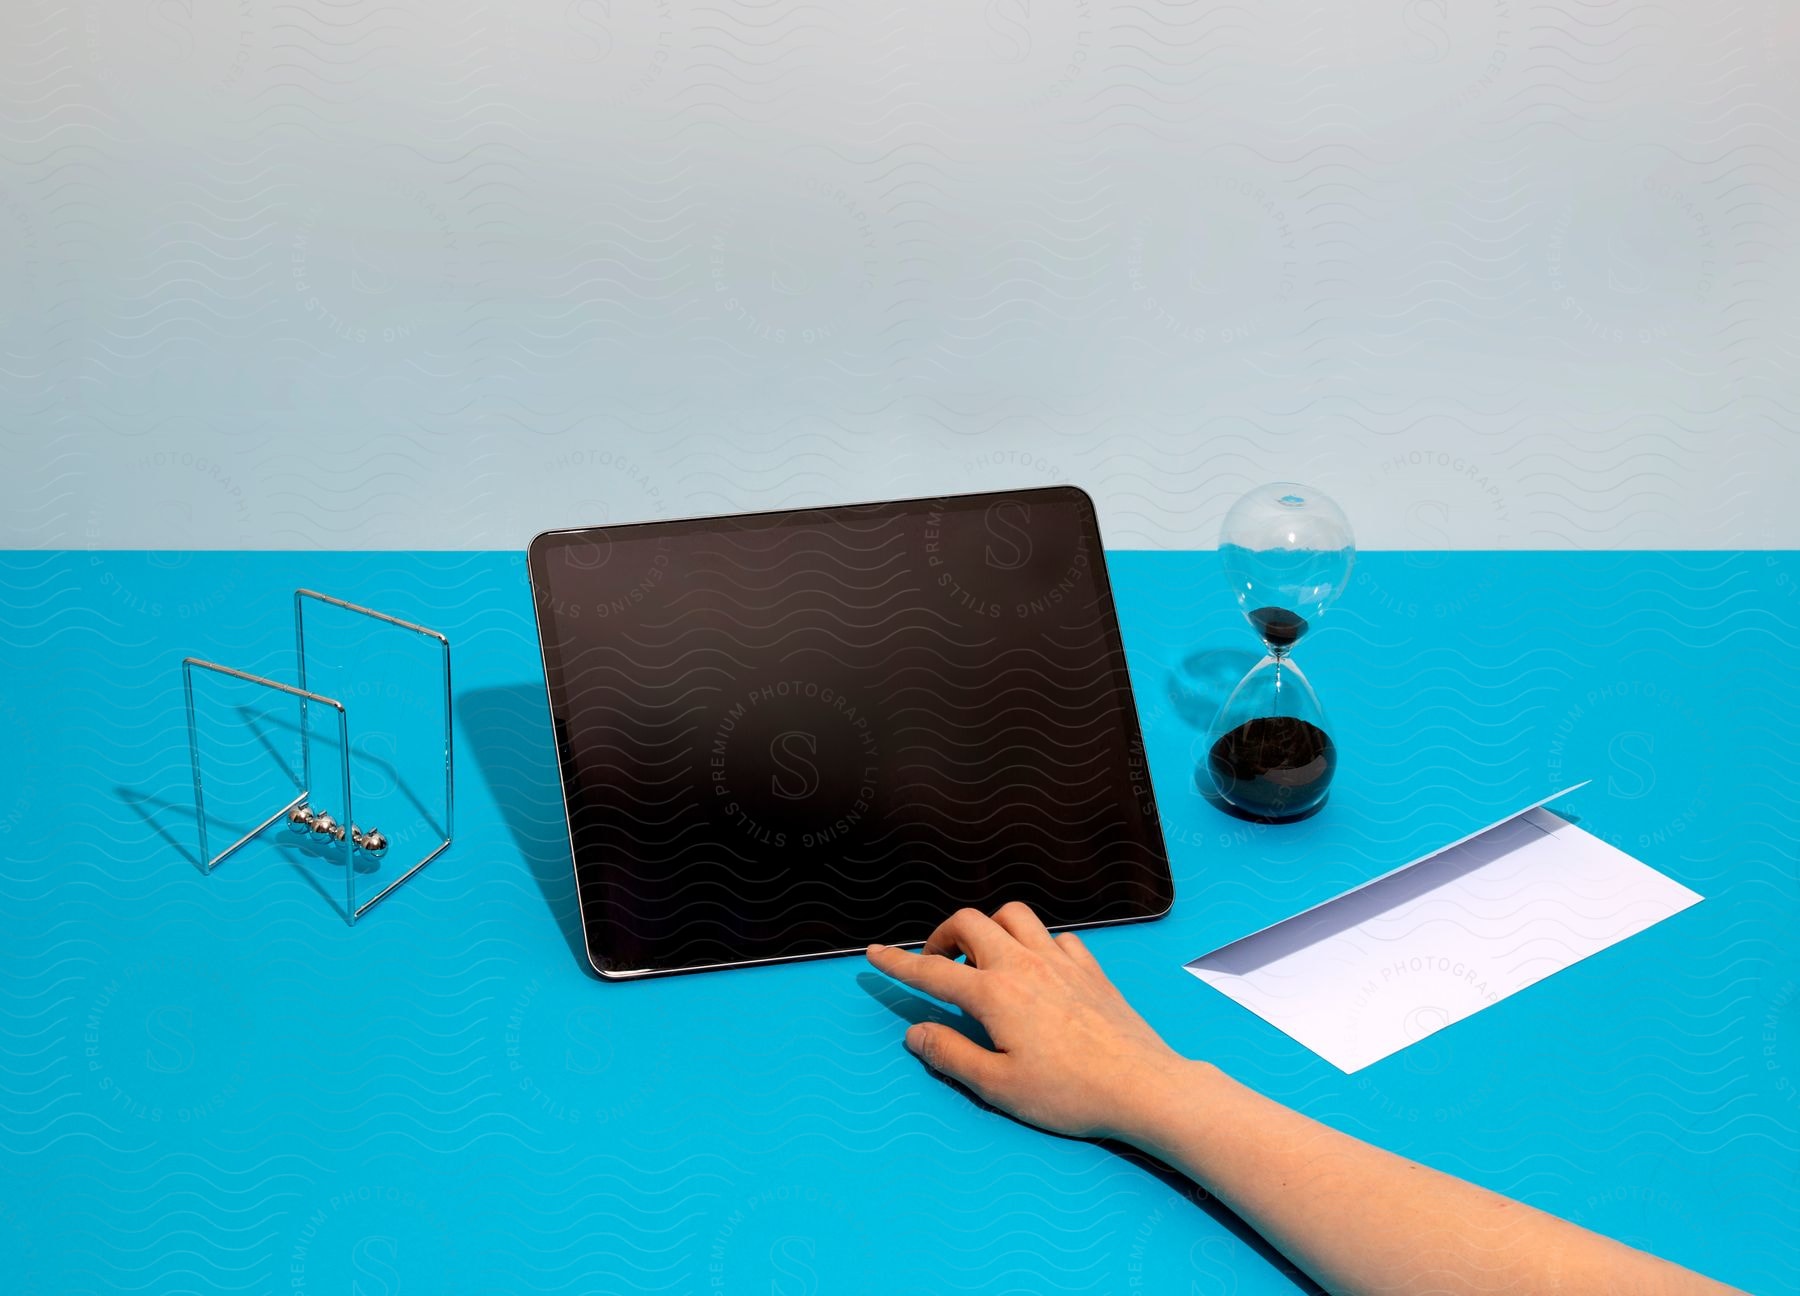 Stock photo of a girl's hand is pointing at a tablet computer on a light blue table between a newton's cradle and an hourglass